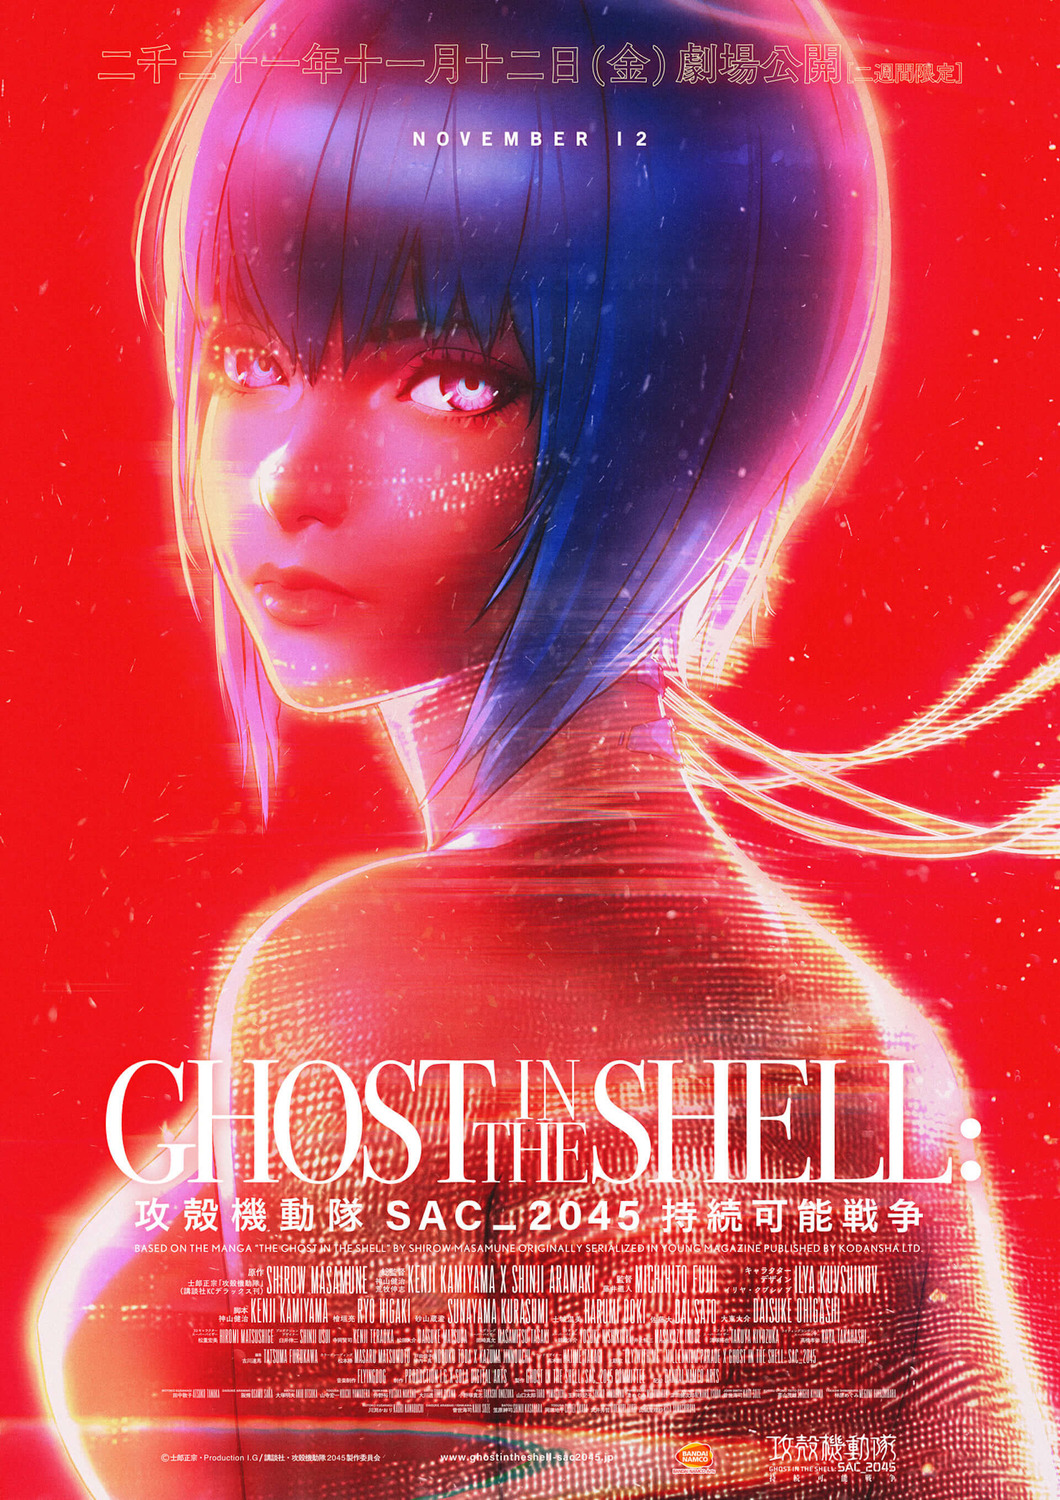 Extra Large Movie Poster Image for Ghost in the Shell: SAC_2045 - Sustainable Warfare (#1 of 2)